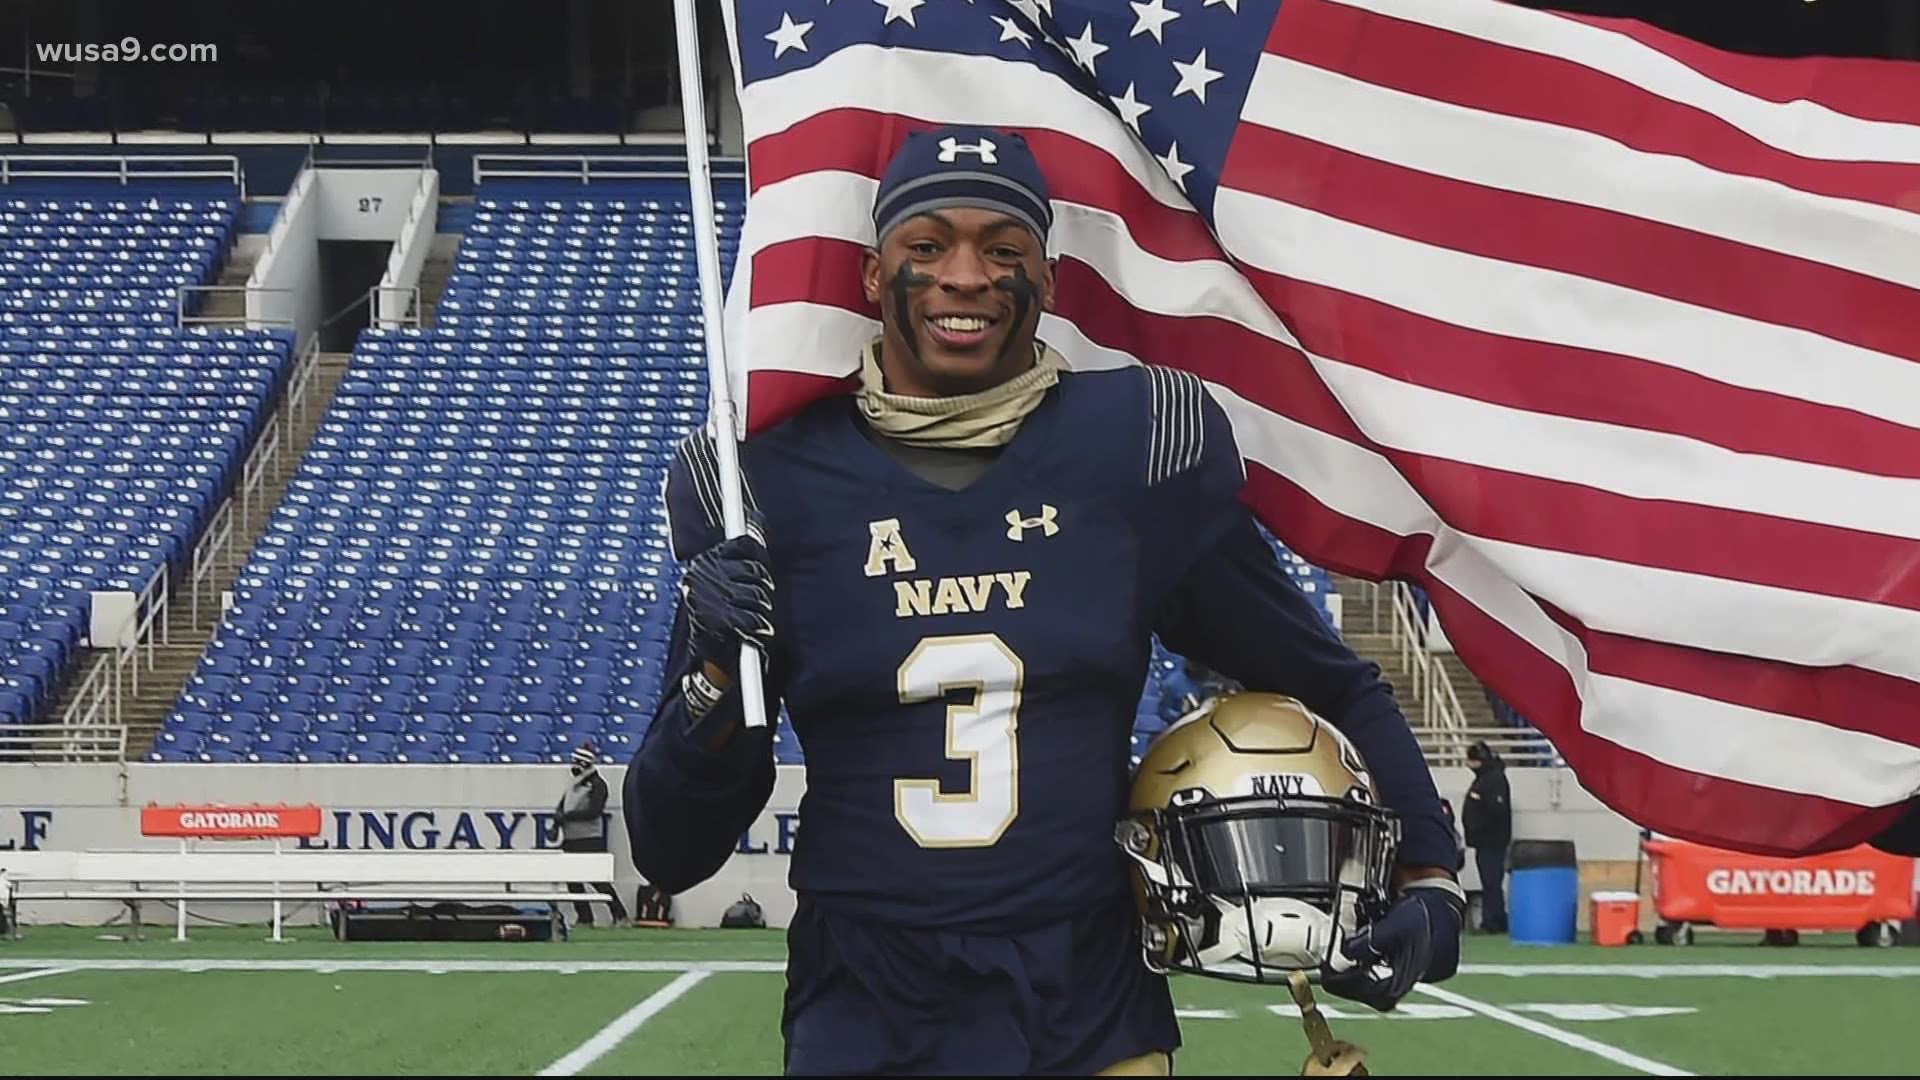 Kinley signed a contract with the Tampa Bay Buccaneers as an undrafted free agent back in May, but the Navy originally denied a request to delay his commission.